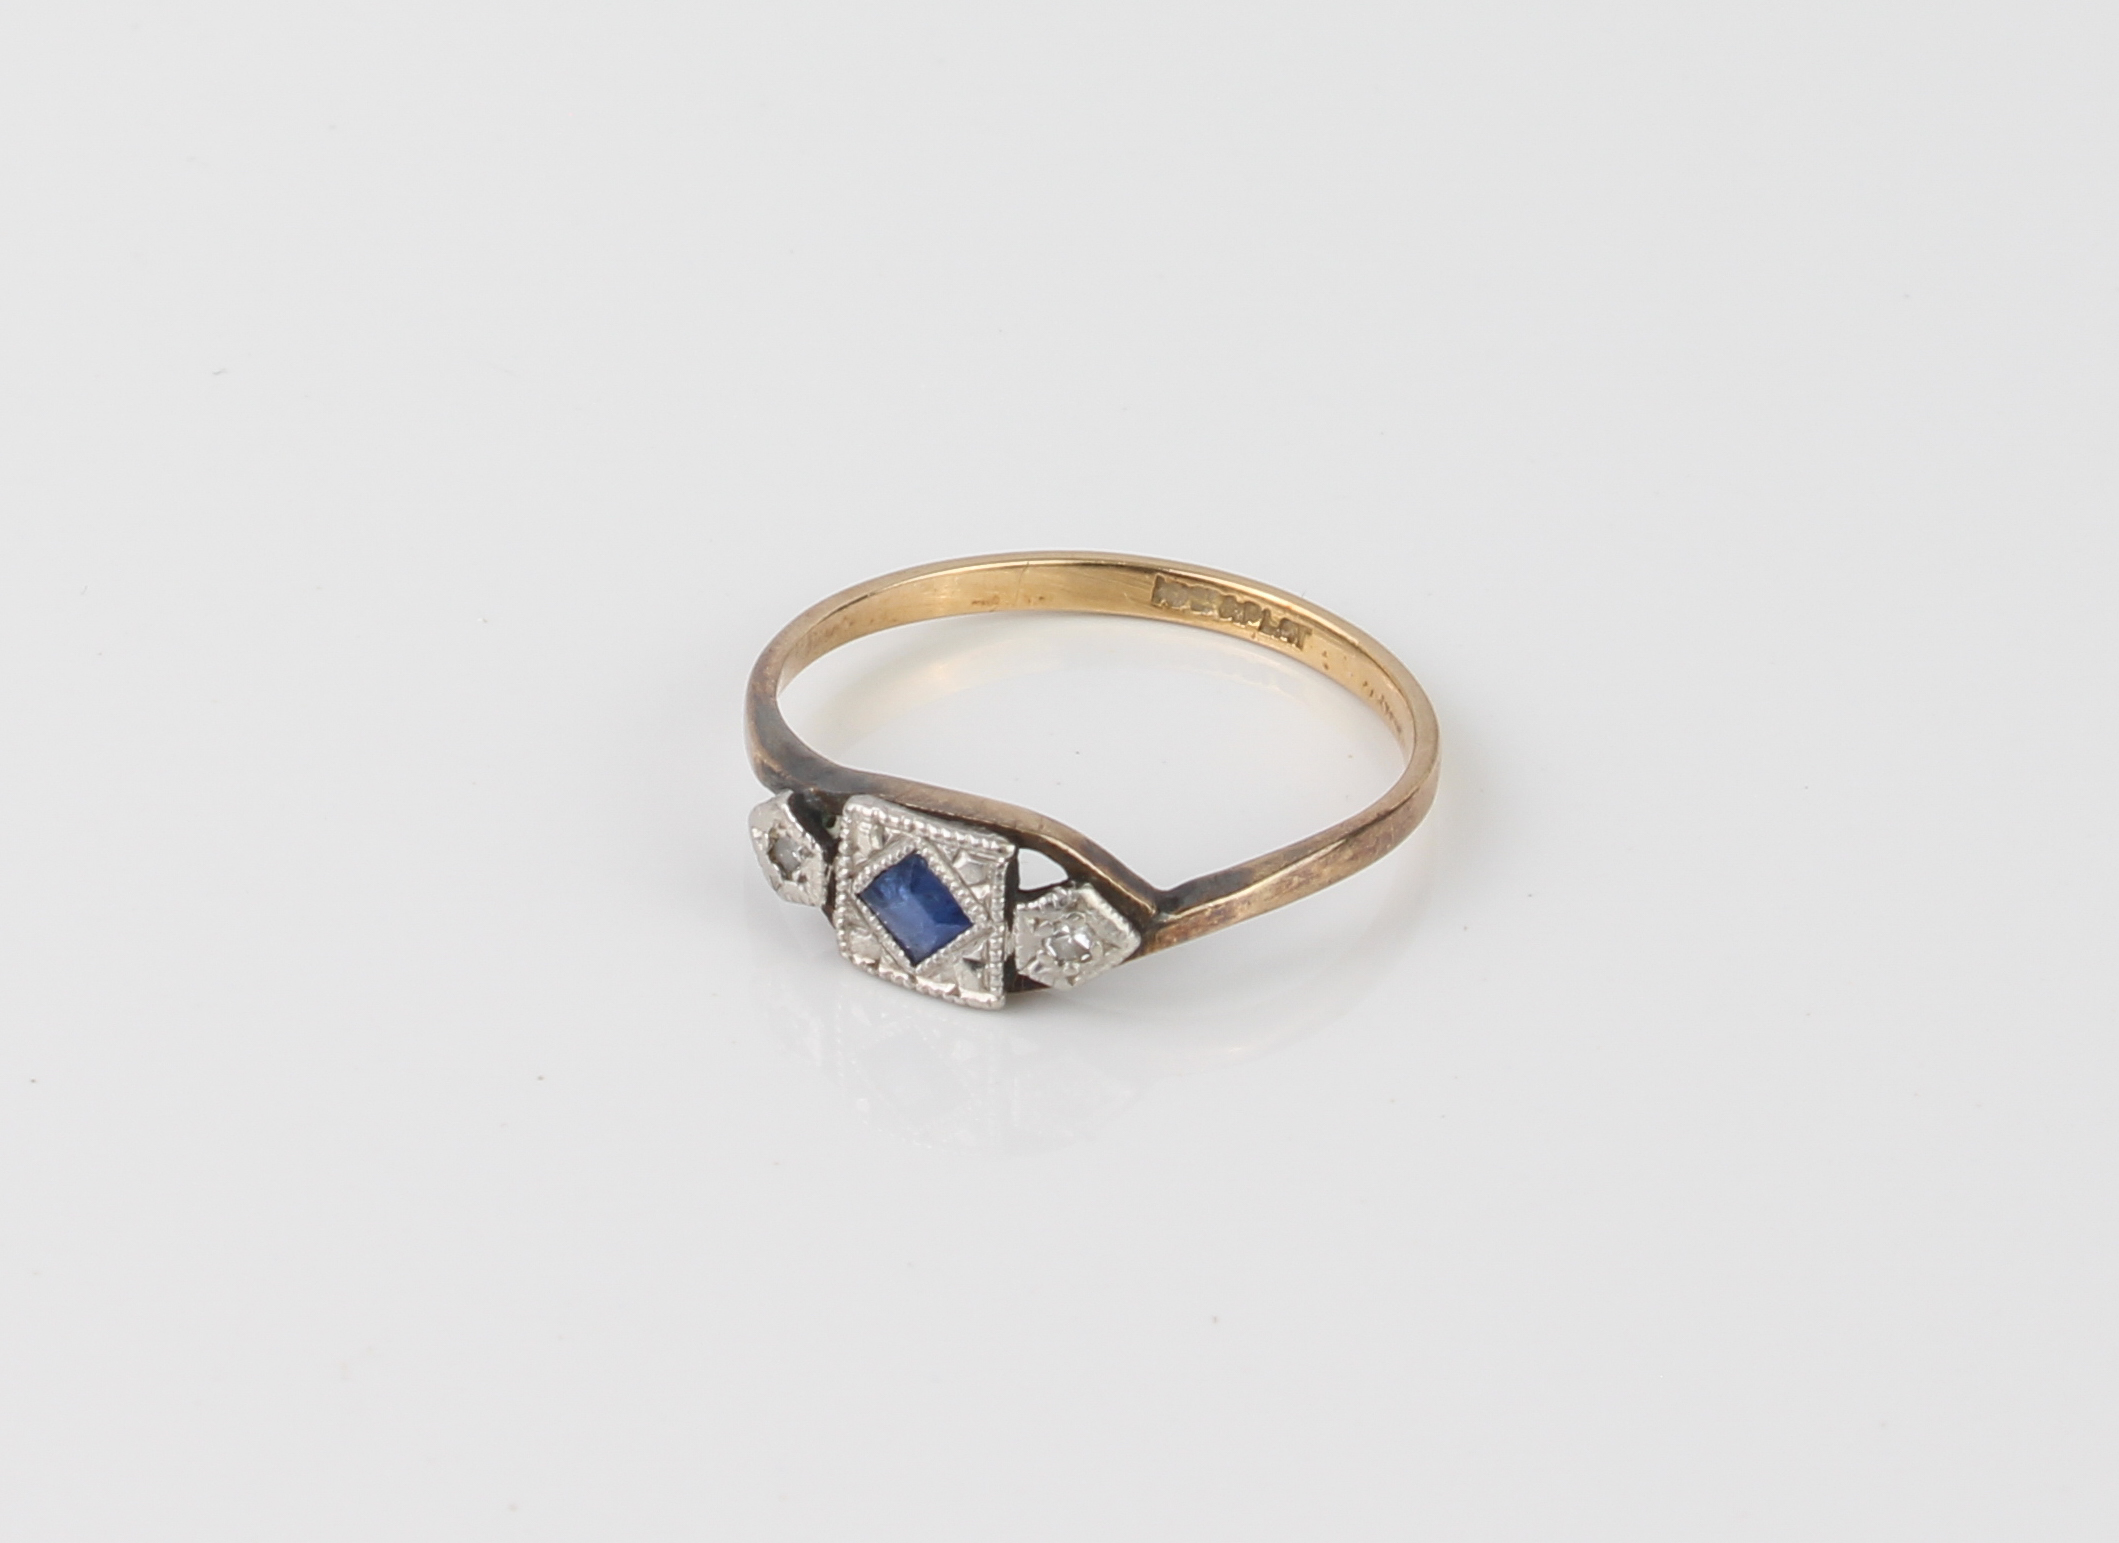 A 1920s 18ct yellow gold, platinum, sapphire and diamond three stone ring - stamped '18CT & PLAT',